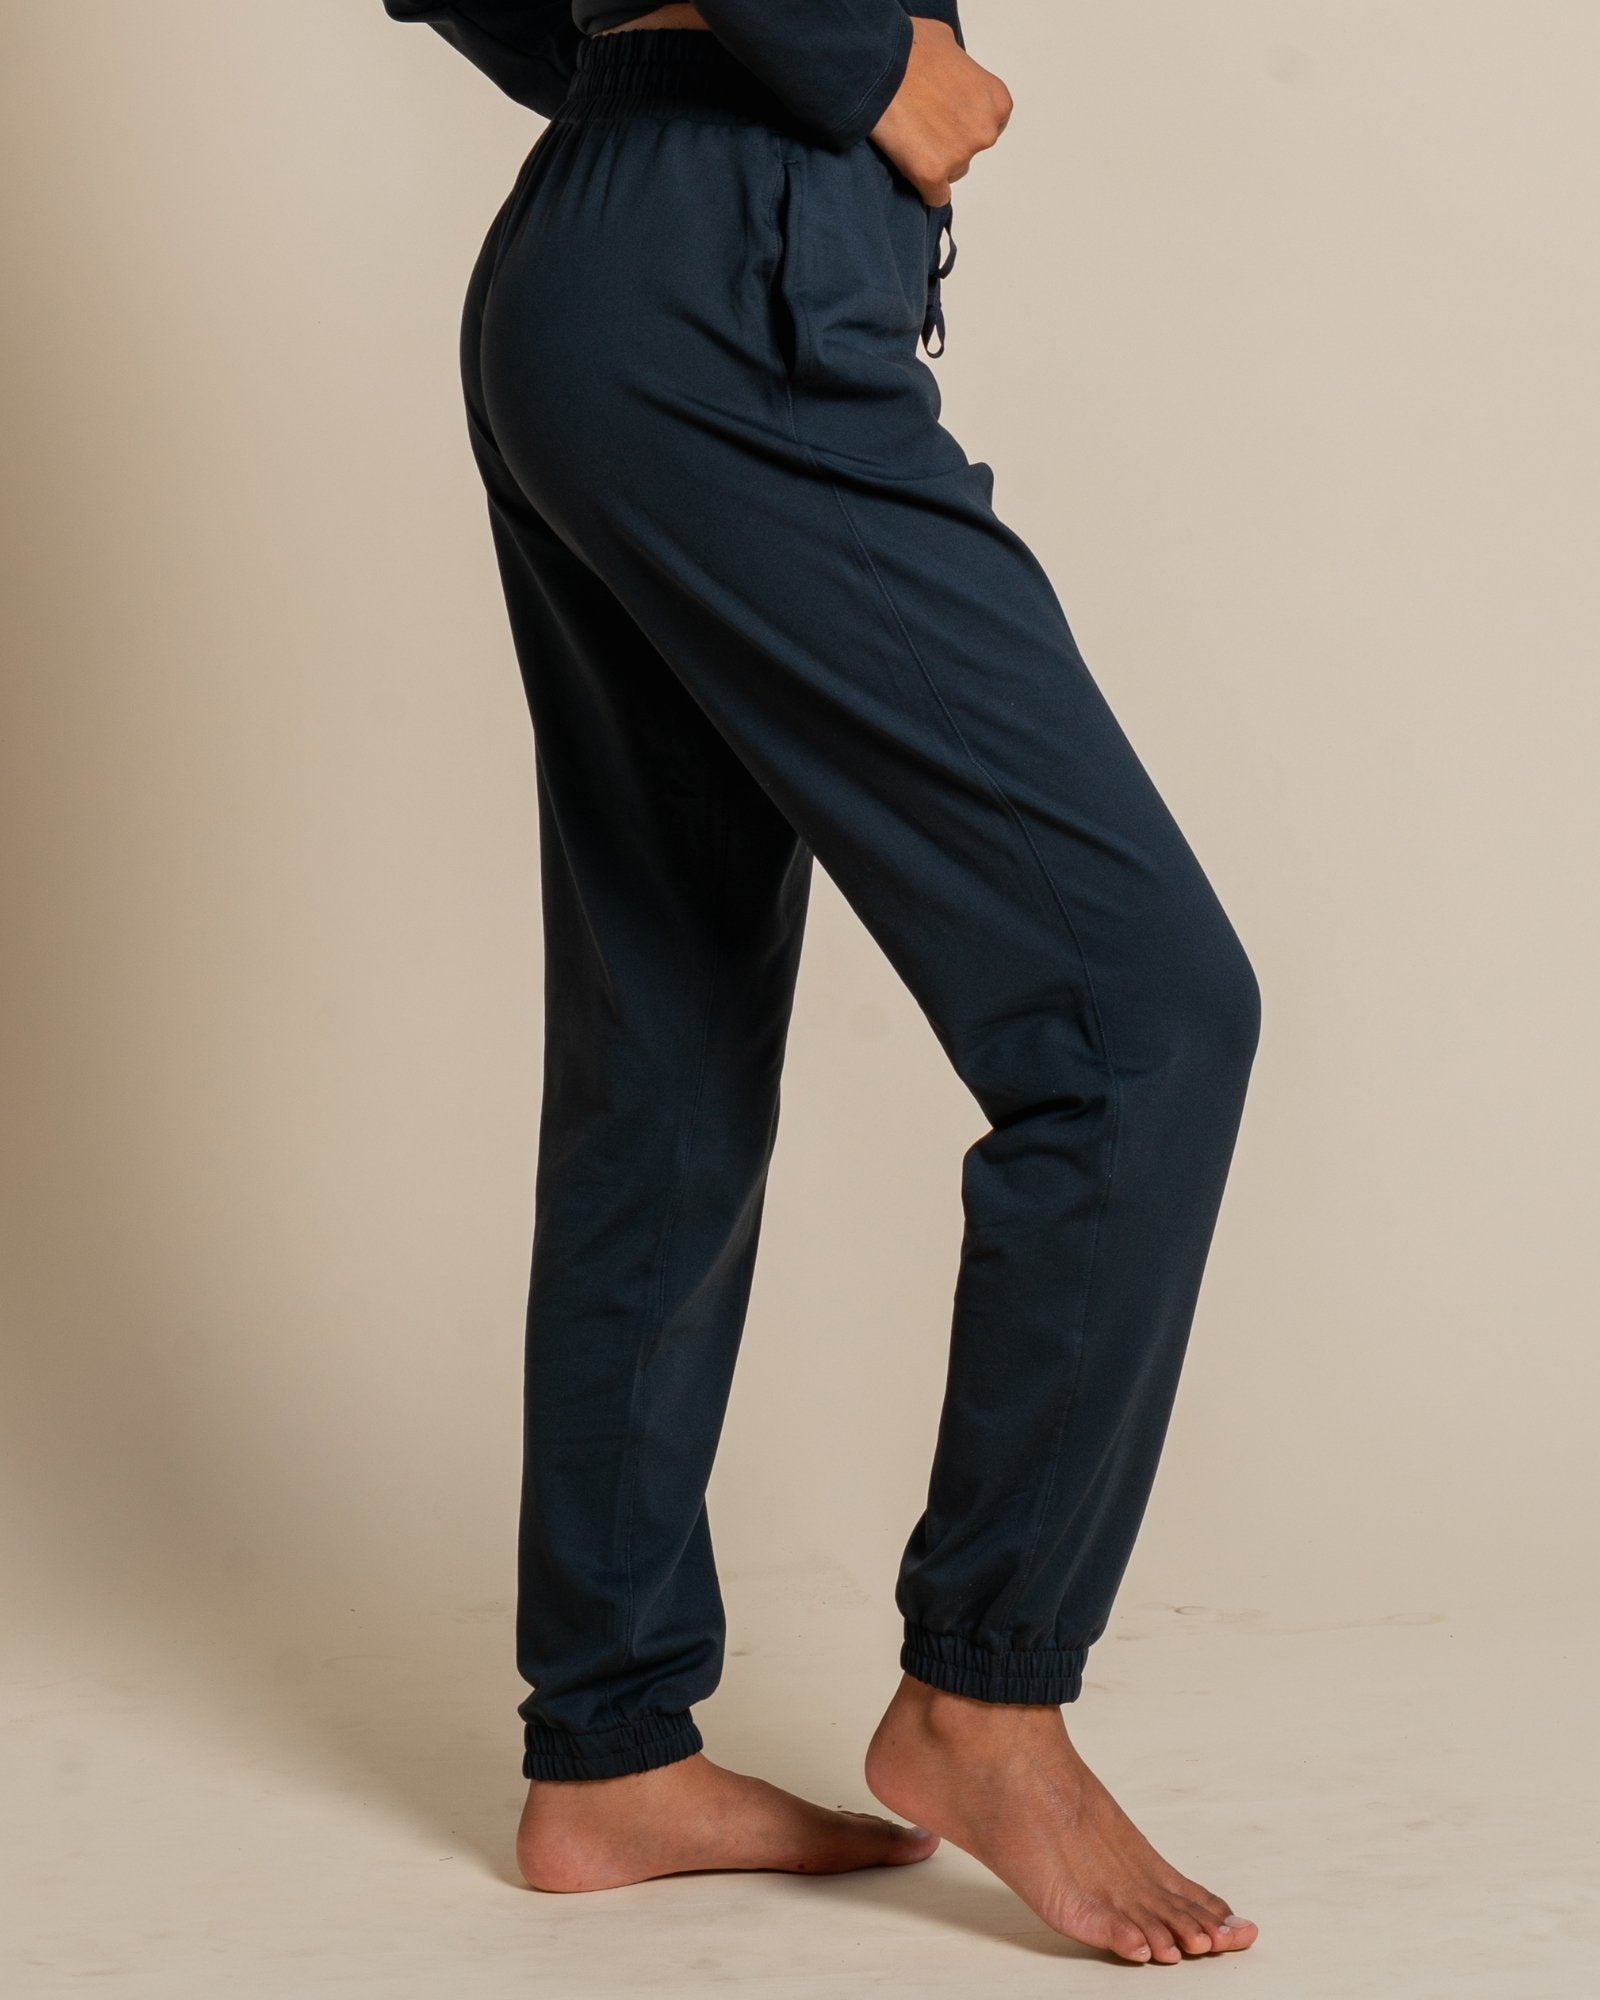 ReSet Jogger from Girlfriend Collective. Discover ethically-made,  sustainable fashion at OAT & OCHRE. Our slow fashion collections features  organic cotton and timeless designs. Shop now for classic, minimal styles.